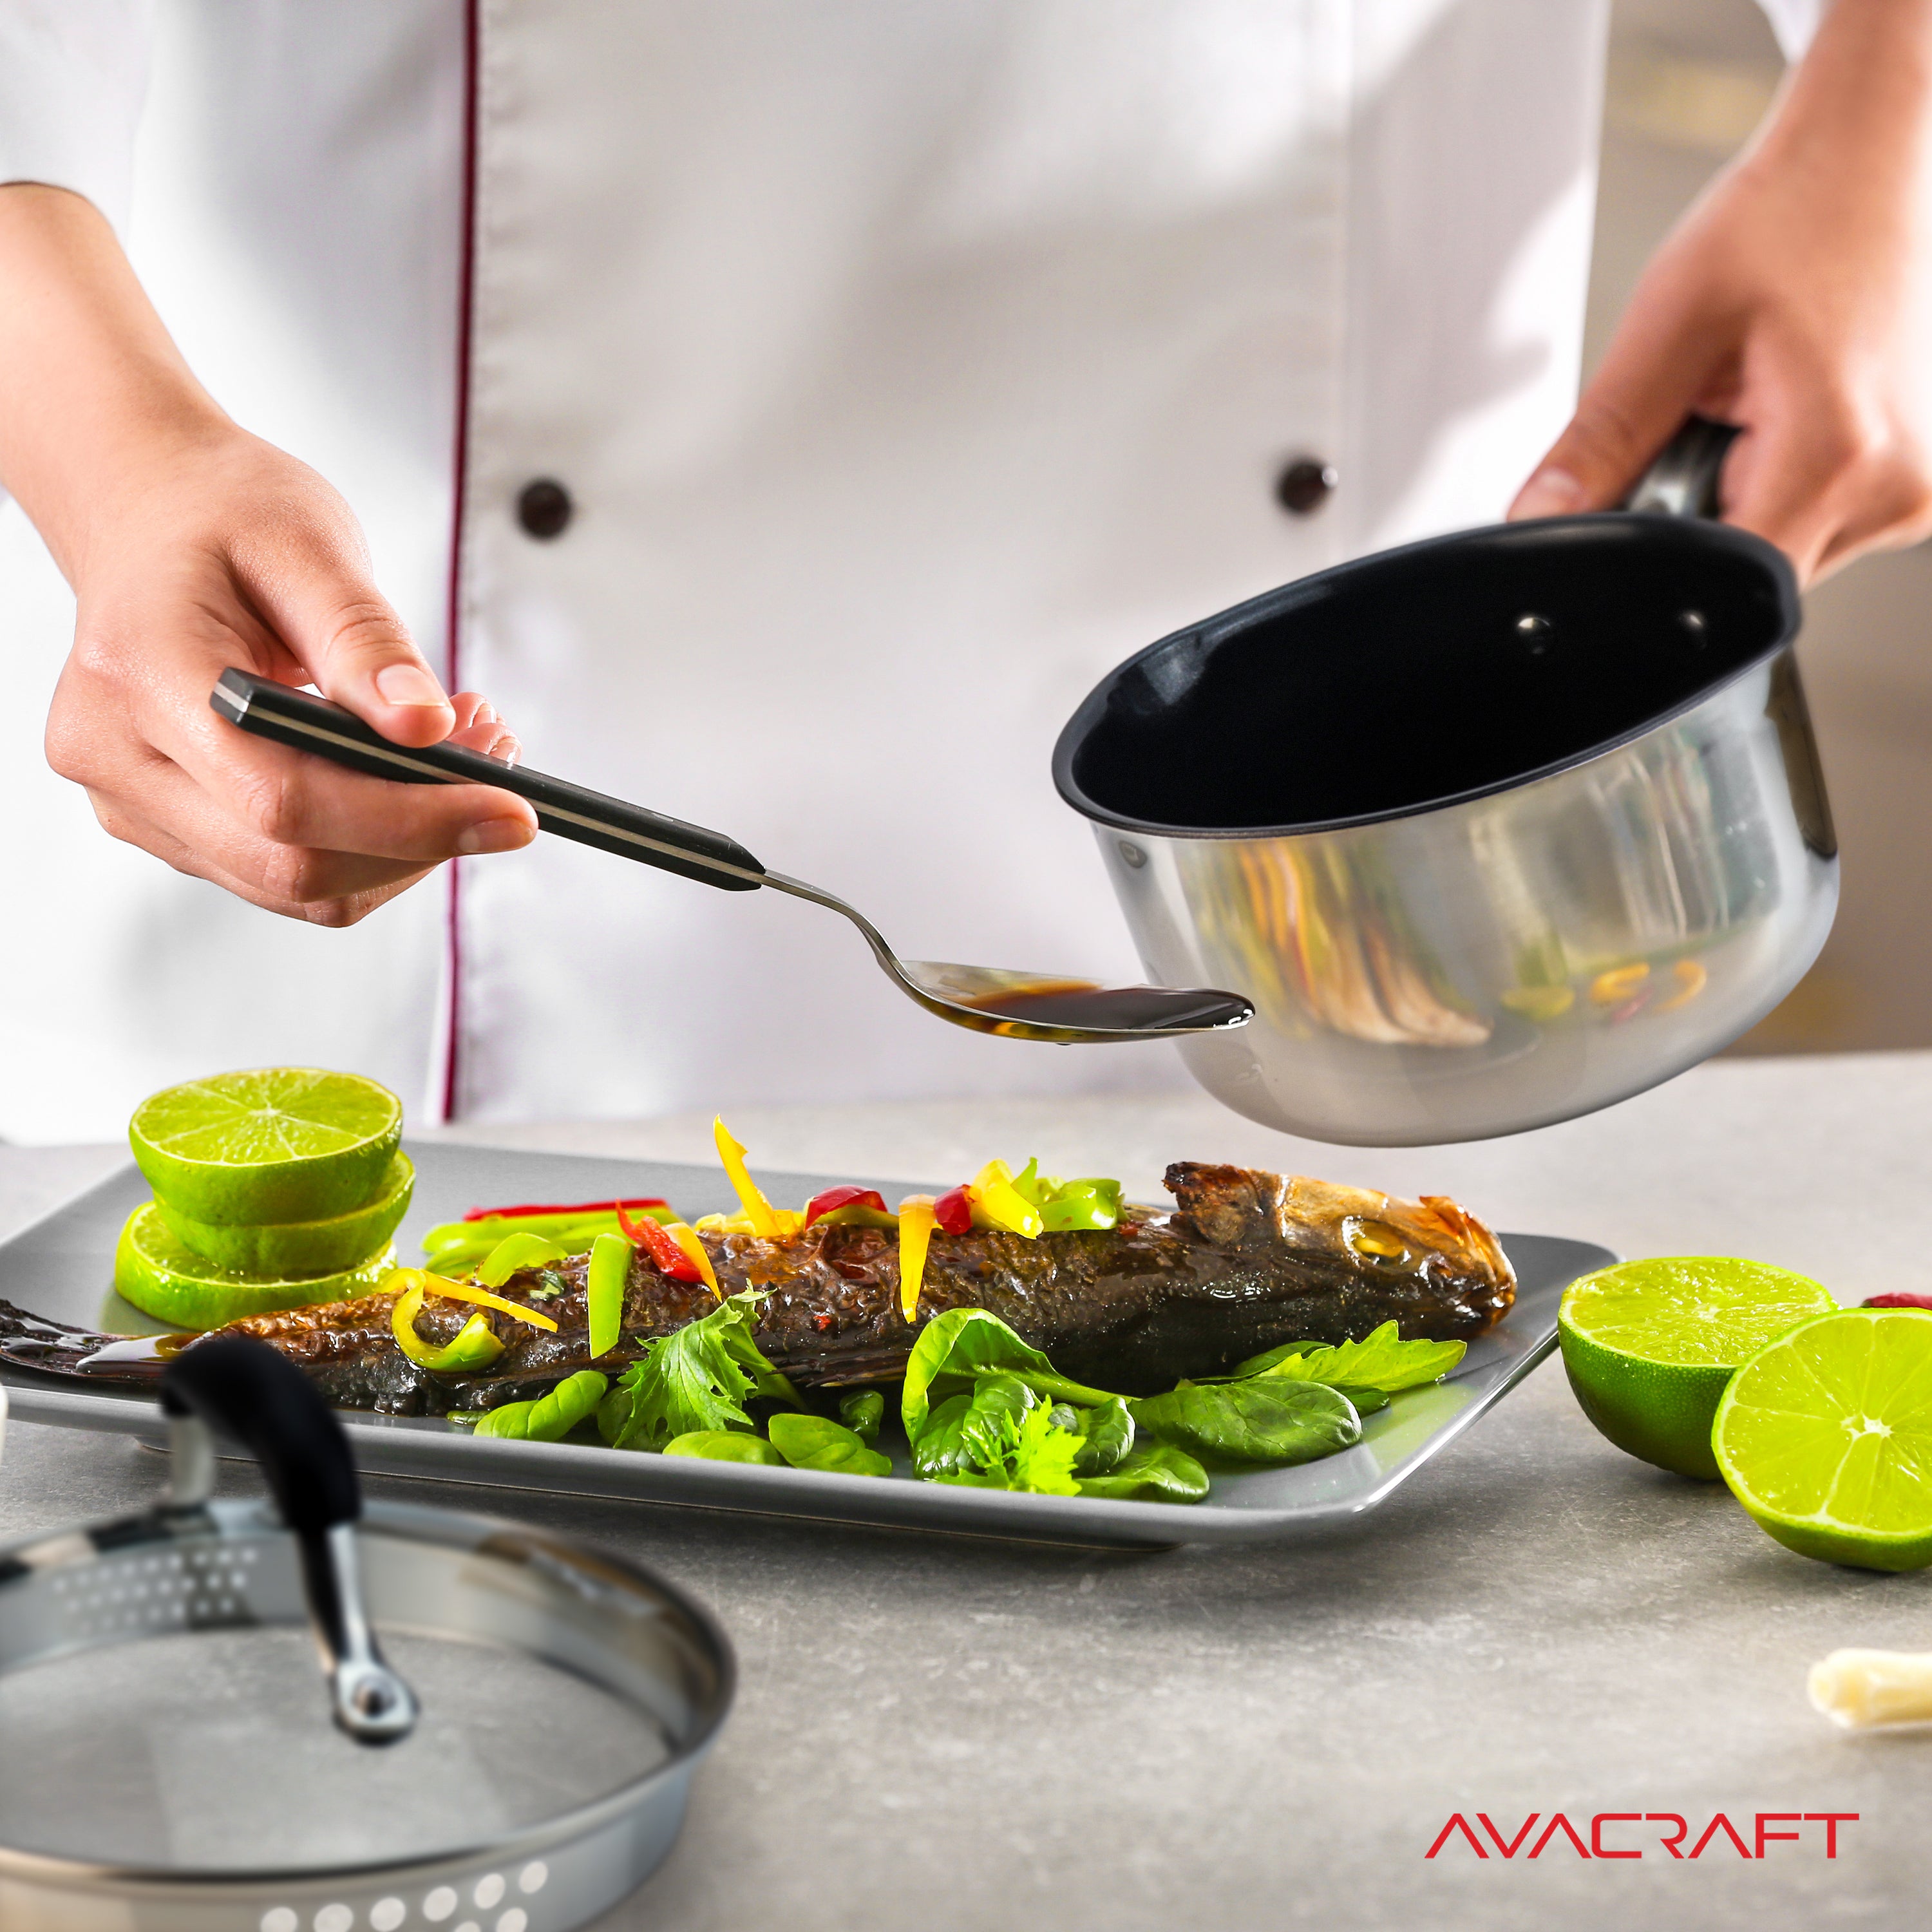 AVACRAFT 9 inch Nonstick Everyday Pan, Ceramic Multiclad Stainless Steel,  100% PTFE, PFOA Free, Ceramic Chef's Pan with Glass Lid, Kadai in Pots and